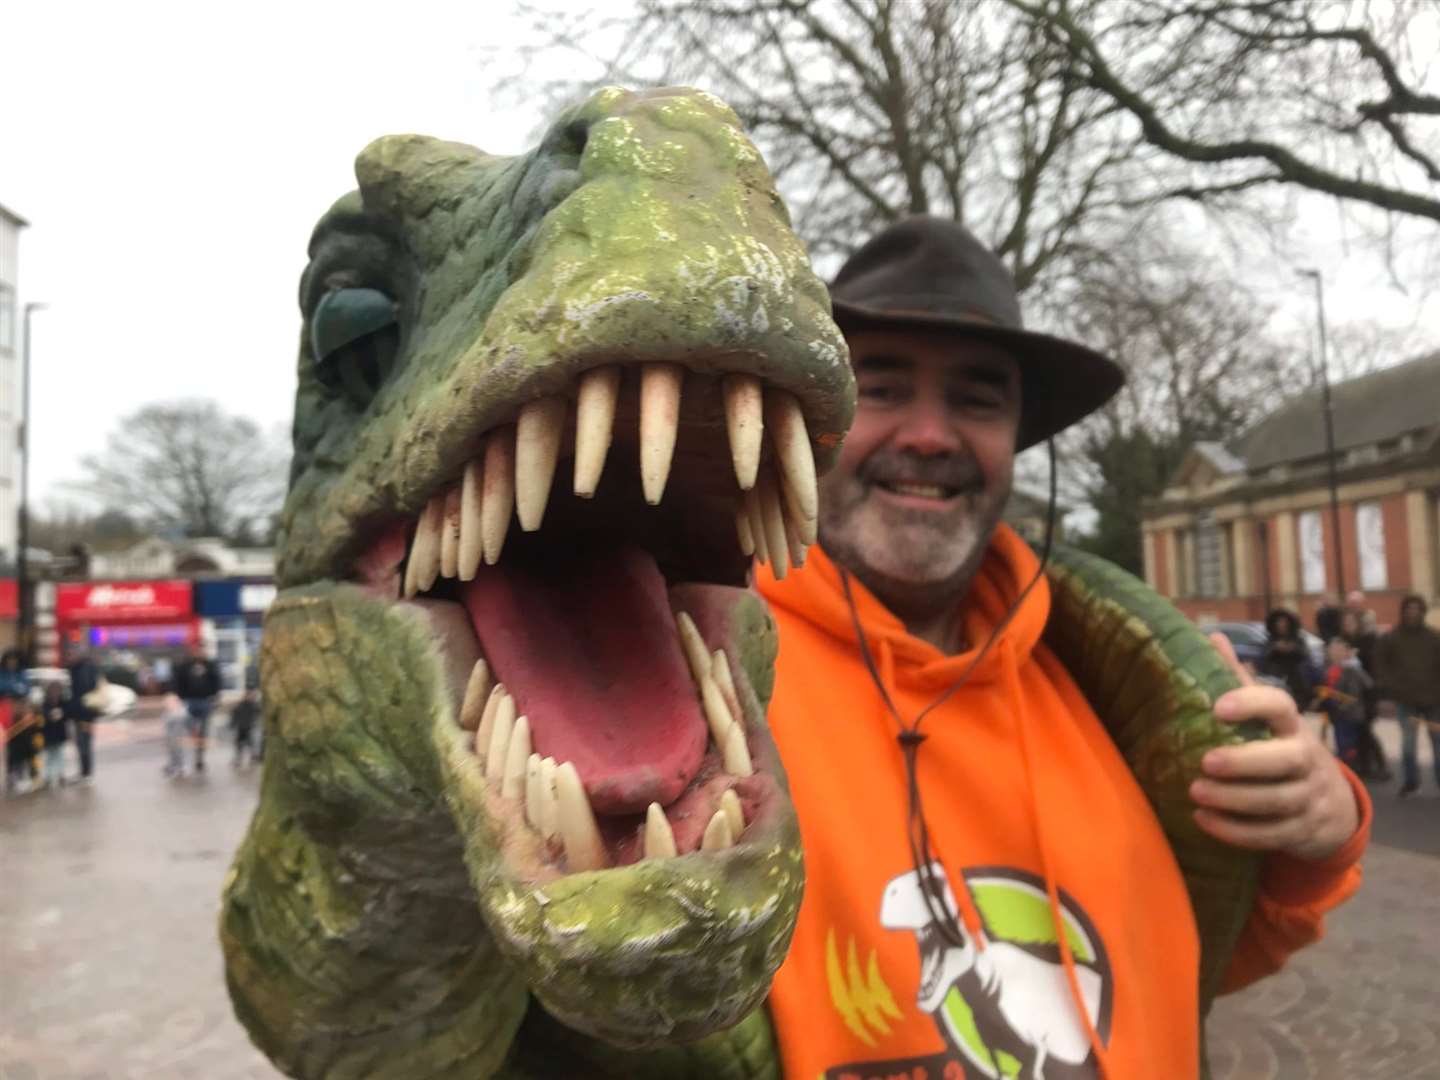 The dinosaur and its handler performed in the square. Picture: Dartford Borough Council